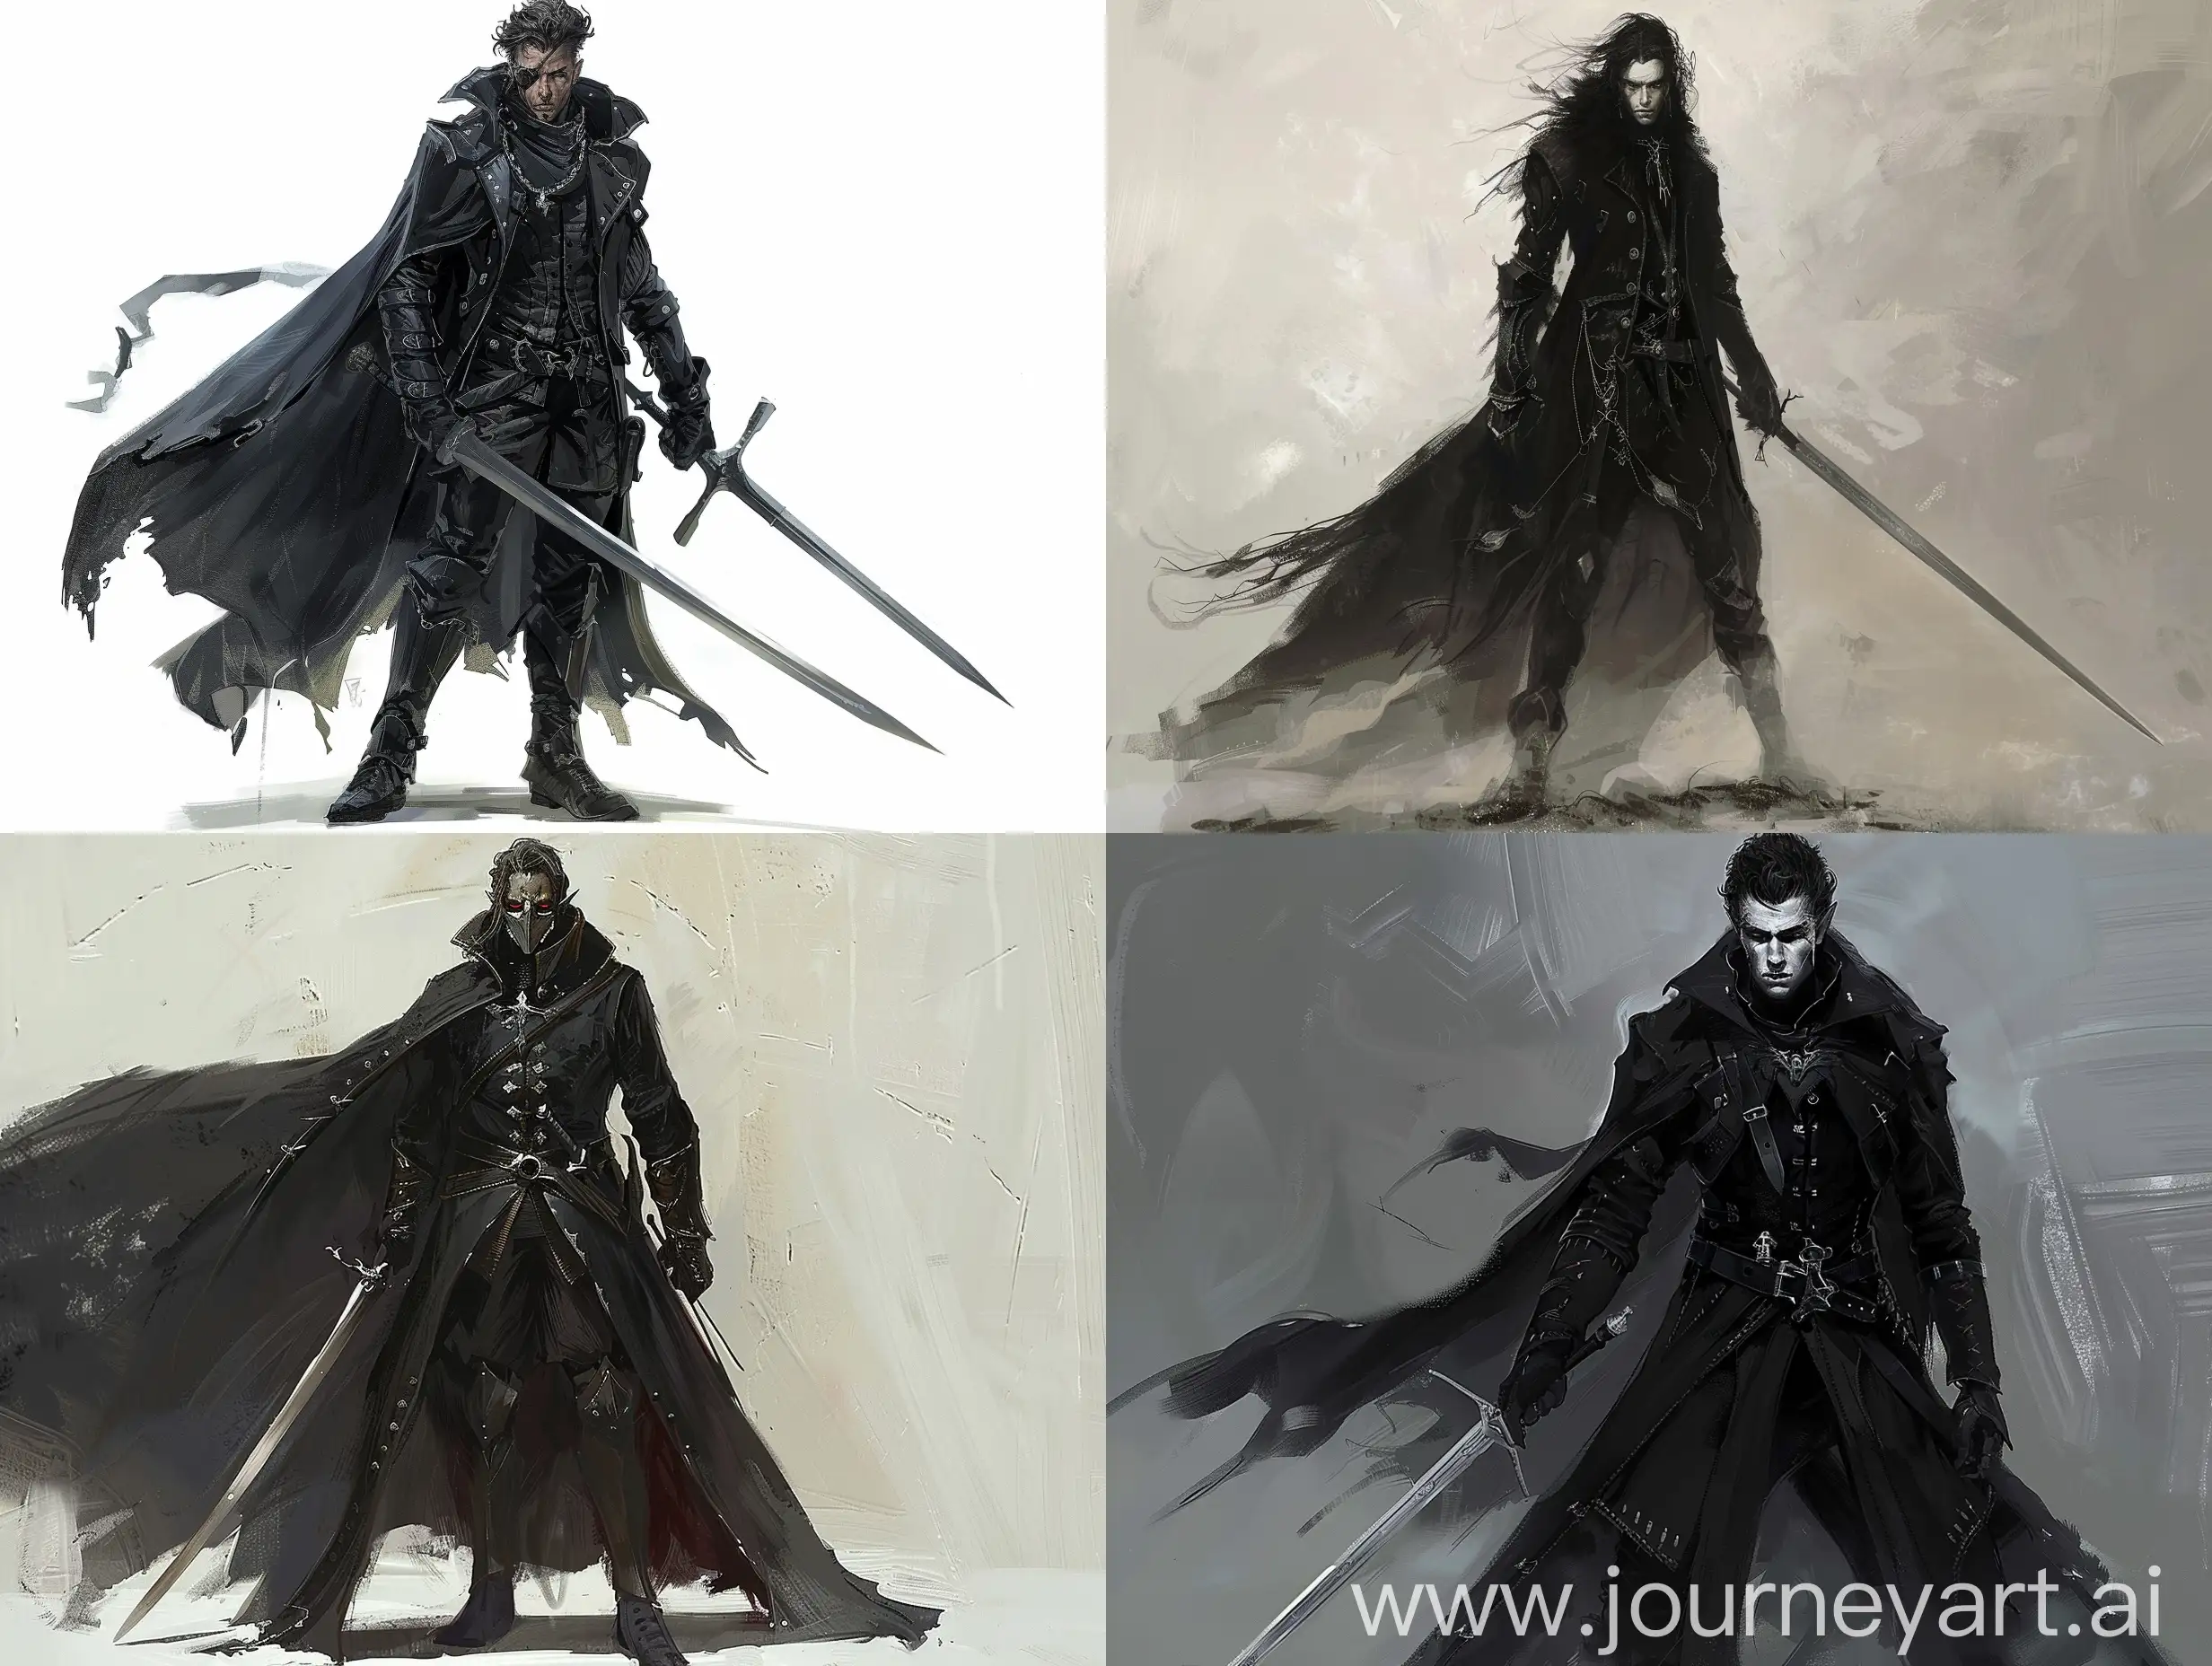 Mysterious-Fey-Warrior-in-Black-Coat-with-Sword